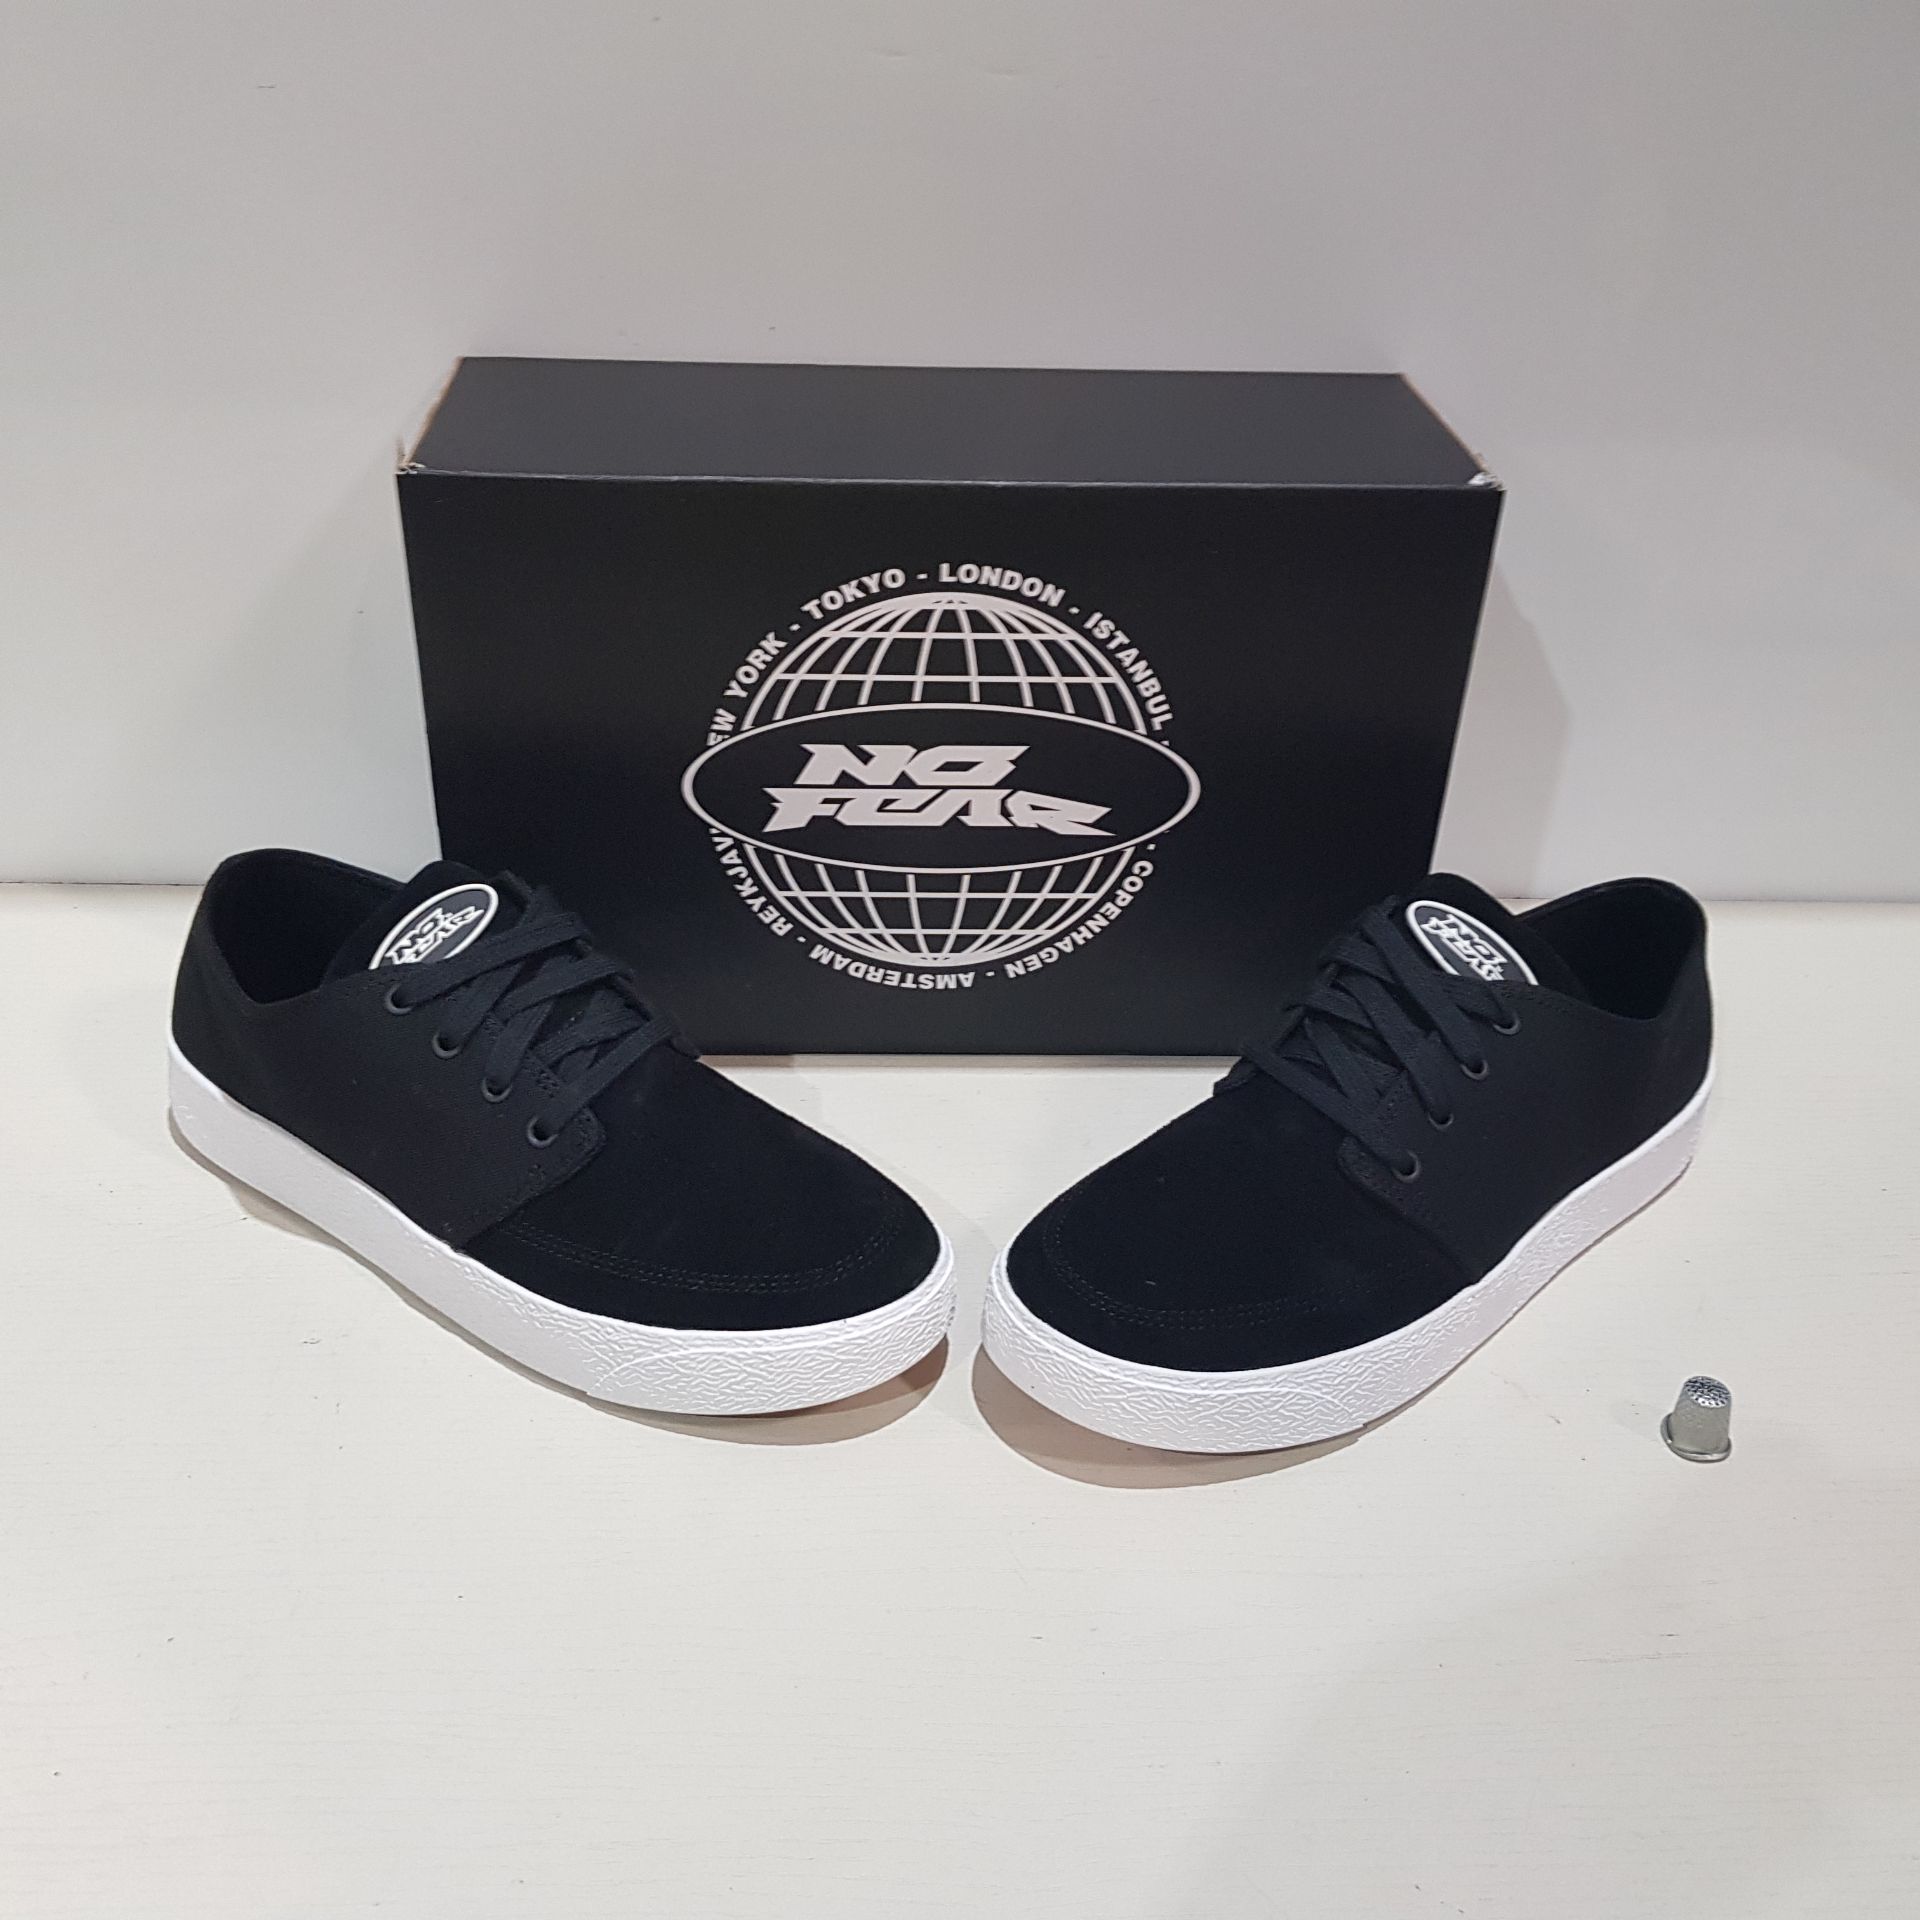 8 X BRAND NEW BOXED NO FEAR SLAM ( SN10) TRAINERS - IN BLACK/WHITE - ALL IN SIZE UK 7 ( RRP £ 74,